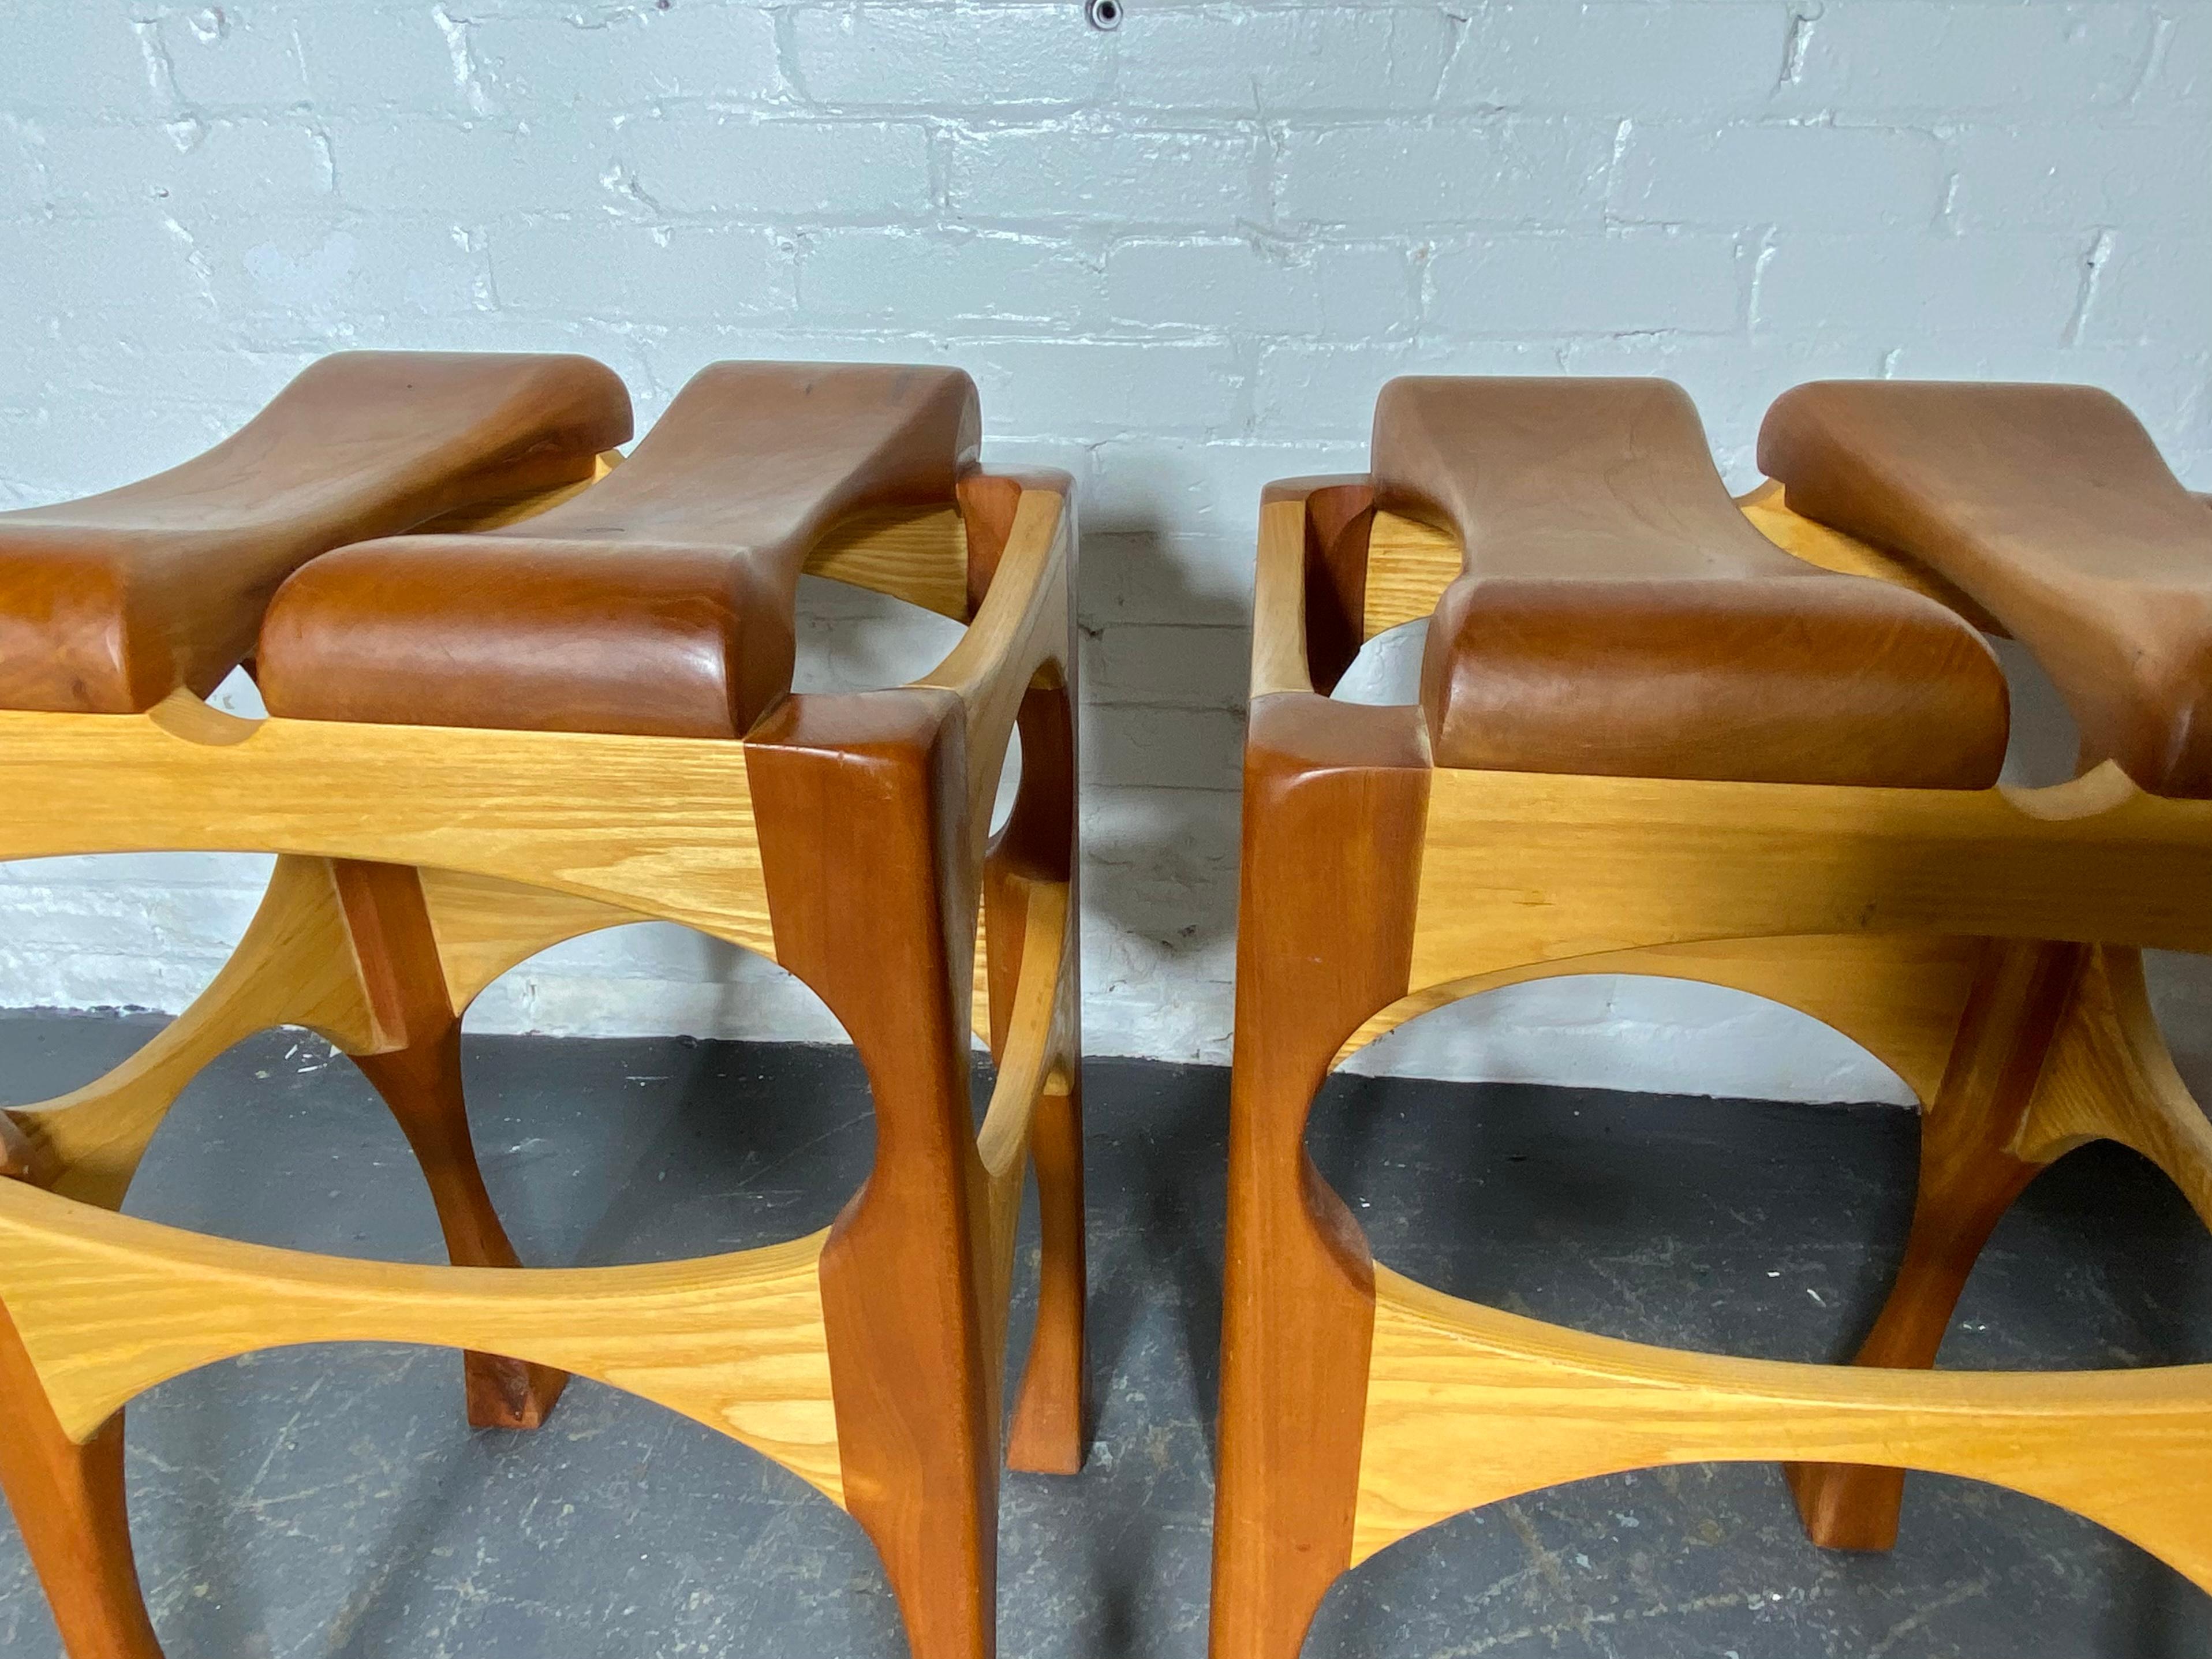 Hand-Carved Hand Crafted Bespoke Workshop/Studio Stools.  2-tone birch and cherry  For Sale